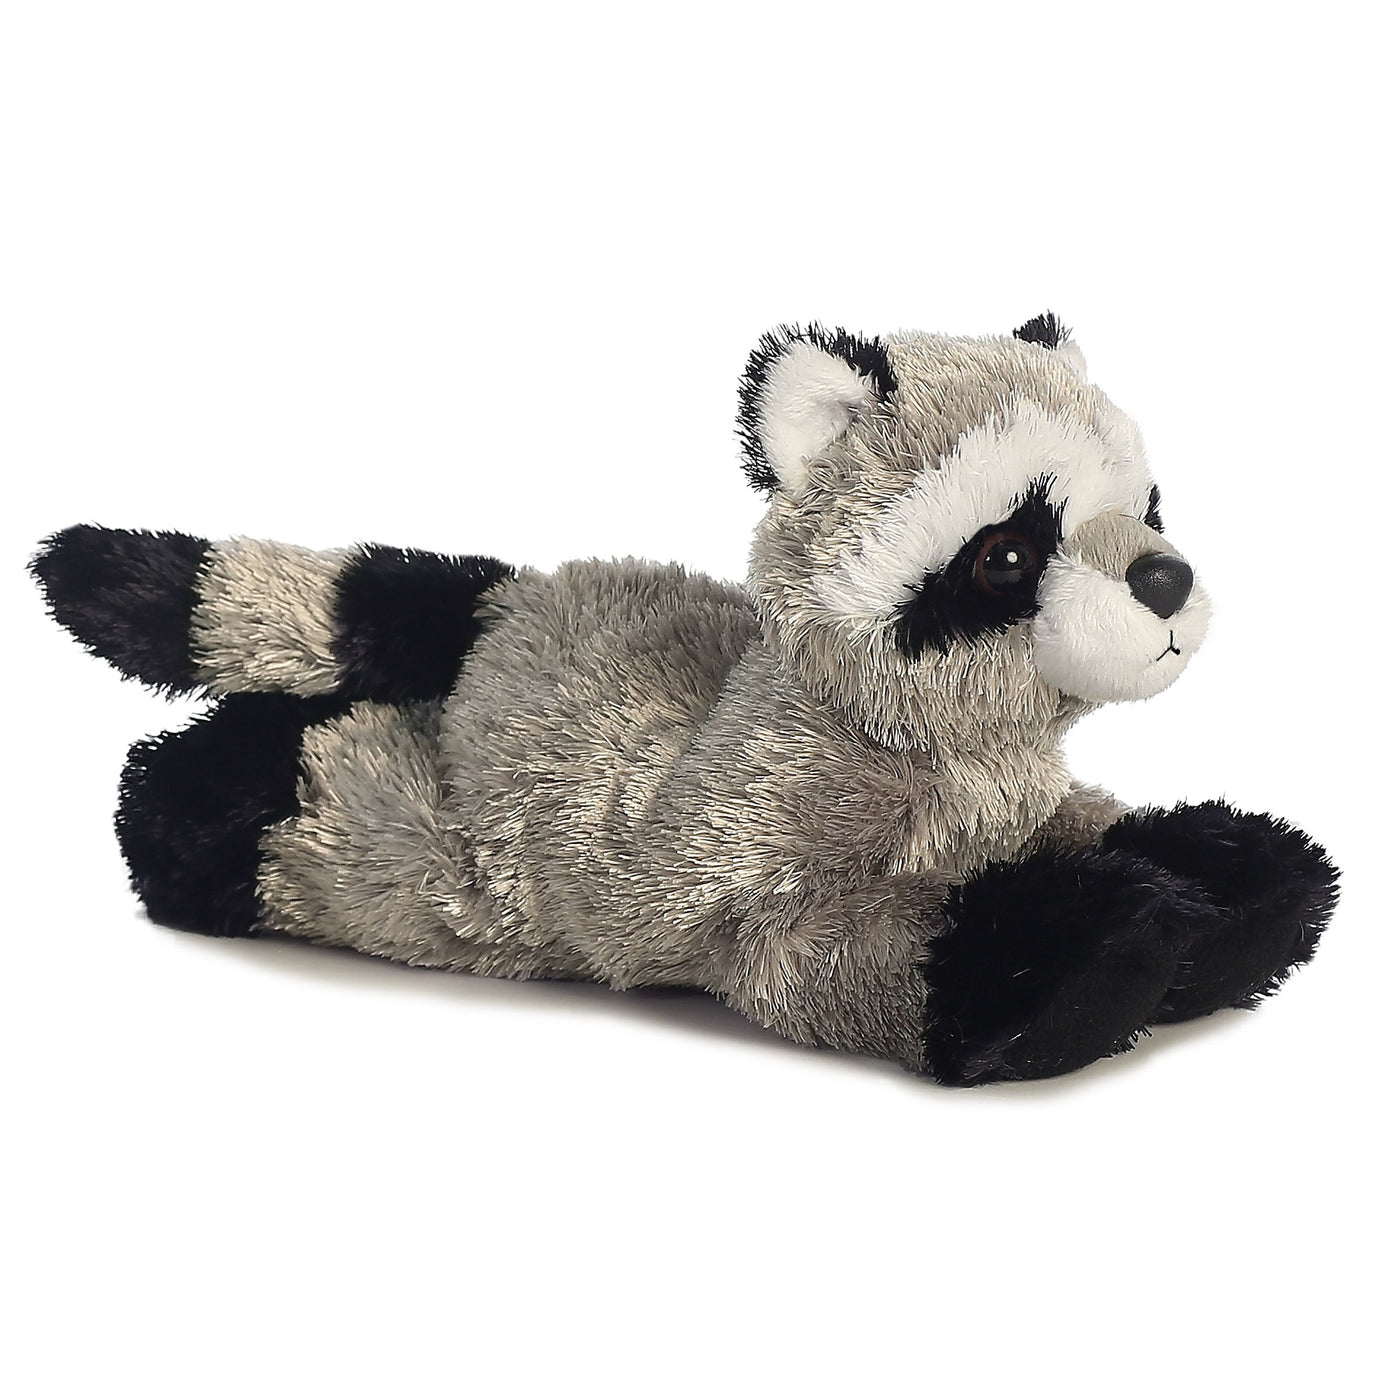 Aurora Flopsy 8" Plush Toy-HOME/GIFTWARE-RASCAL-Kevin's Fine Outdoor Gear & Apparel